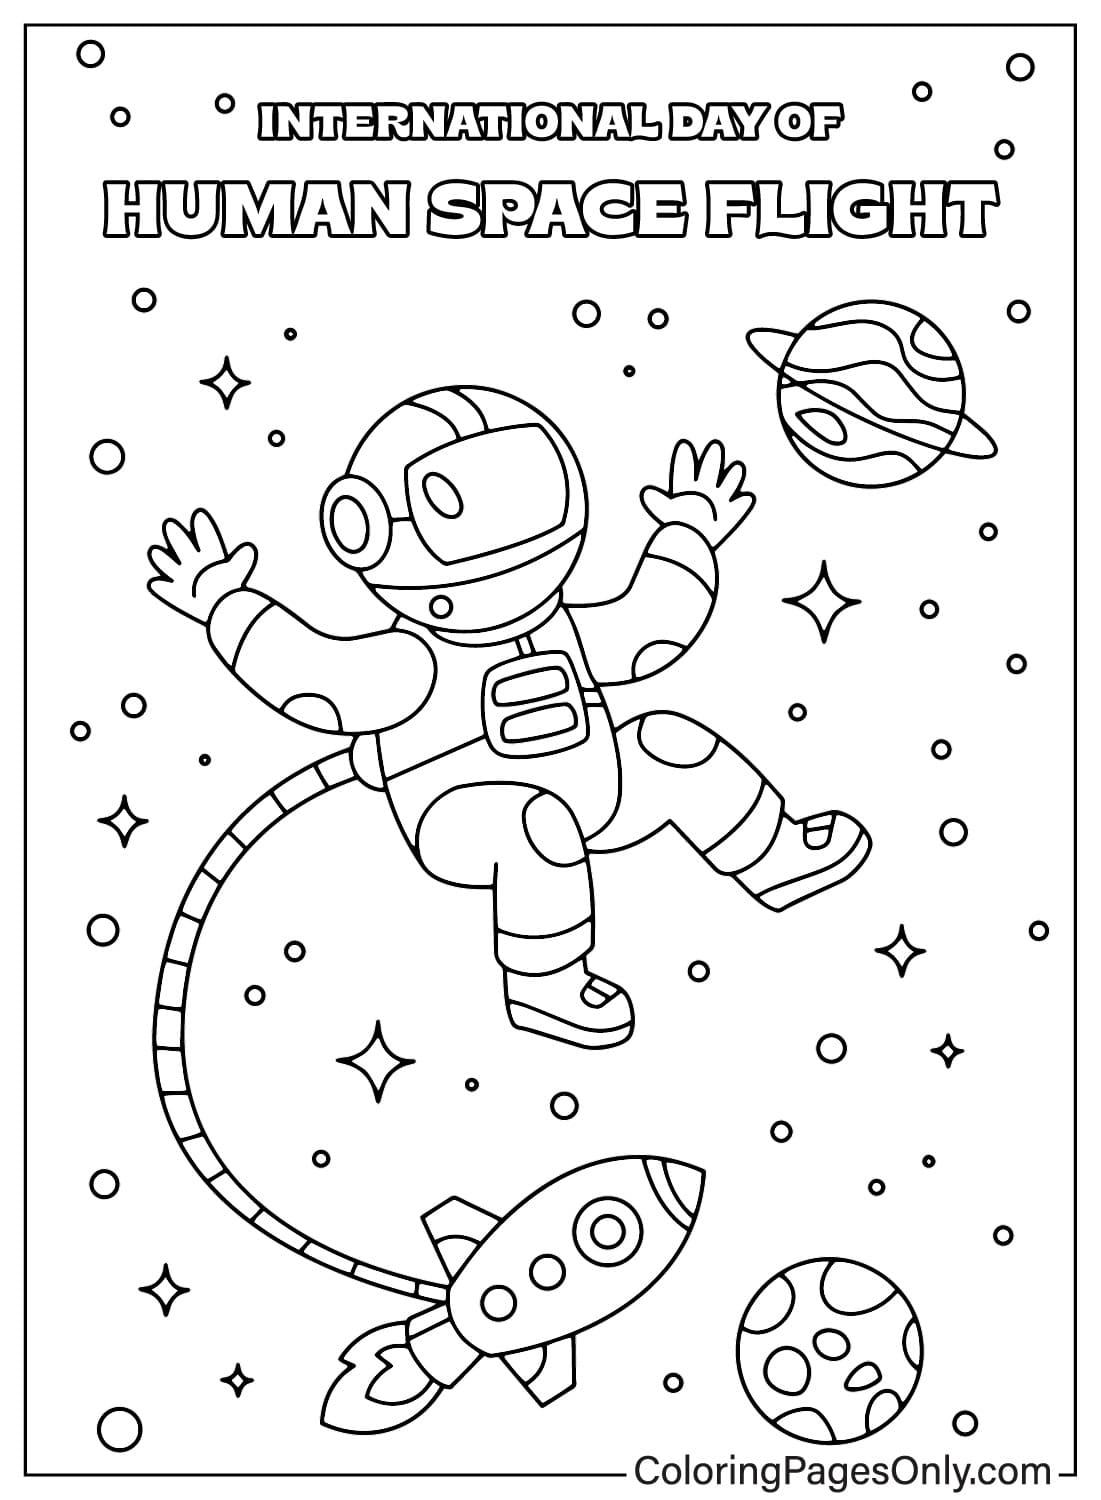 International Day of Human Space Flight Color Sheets from International Day of Human Space Flight